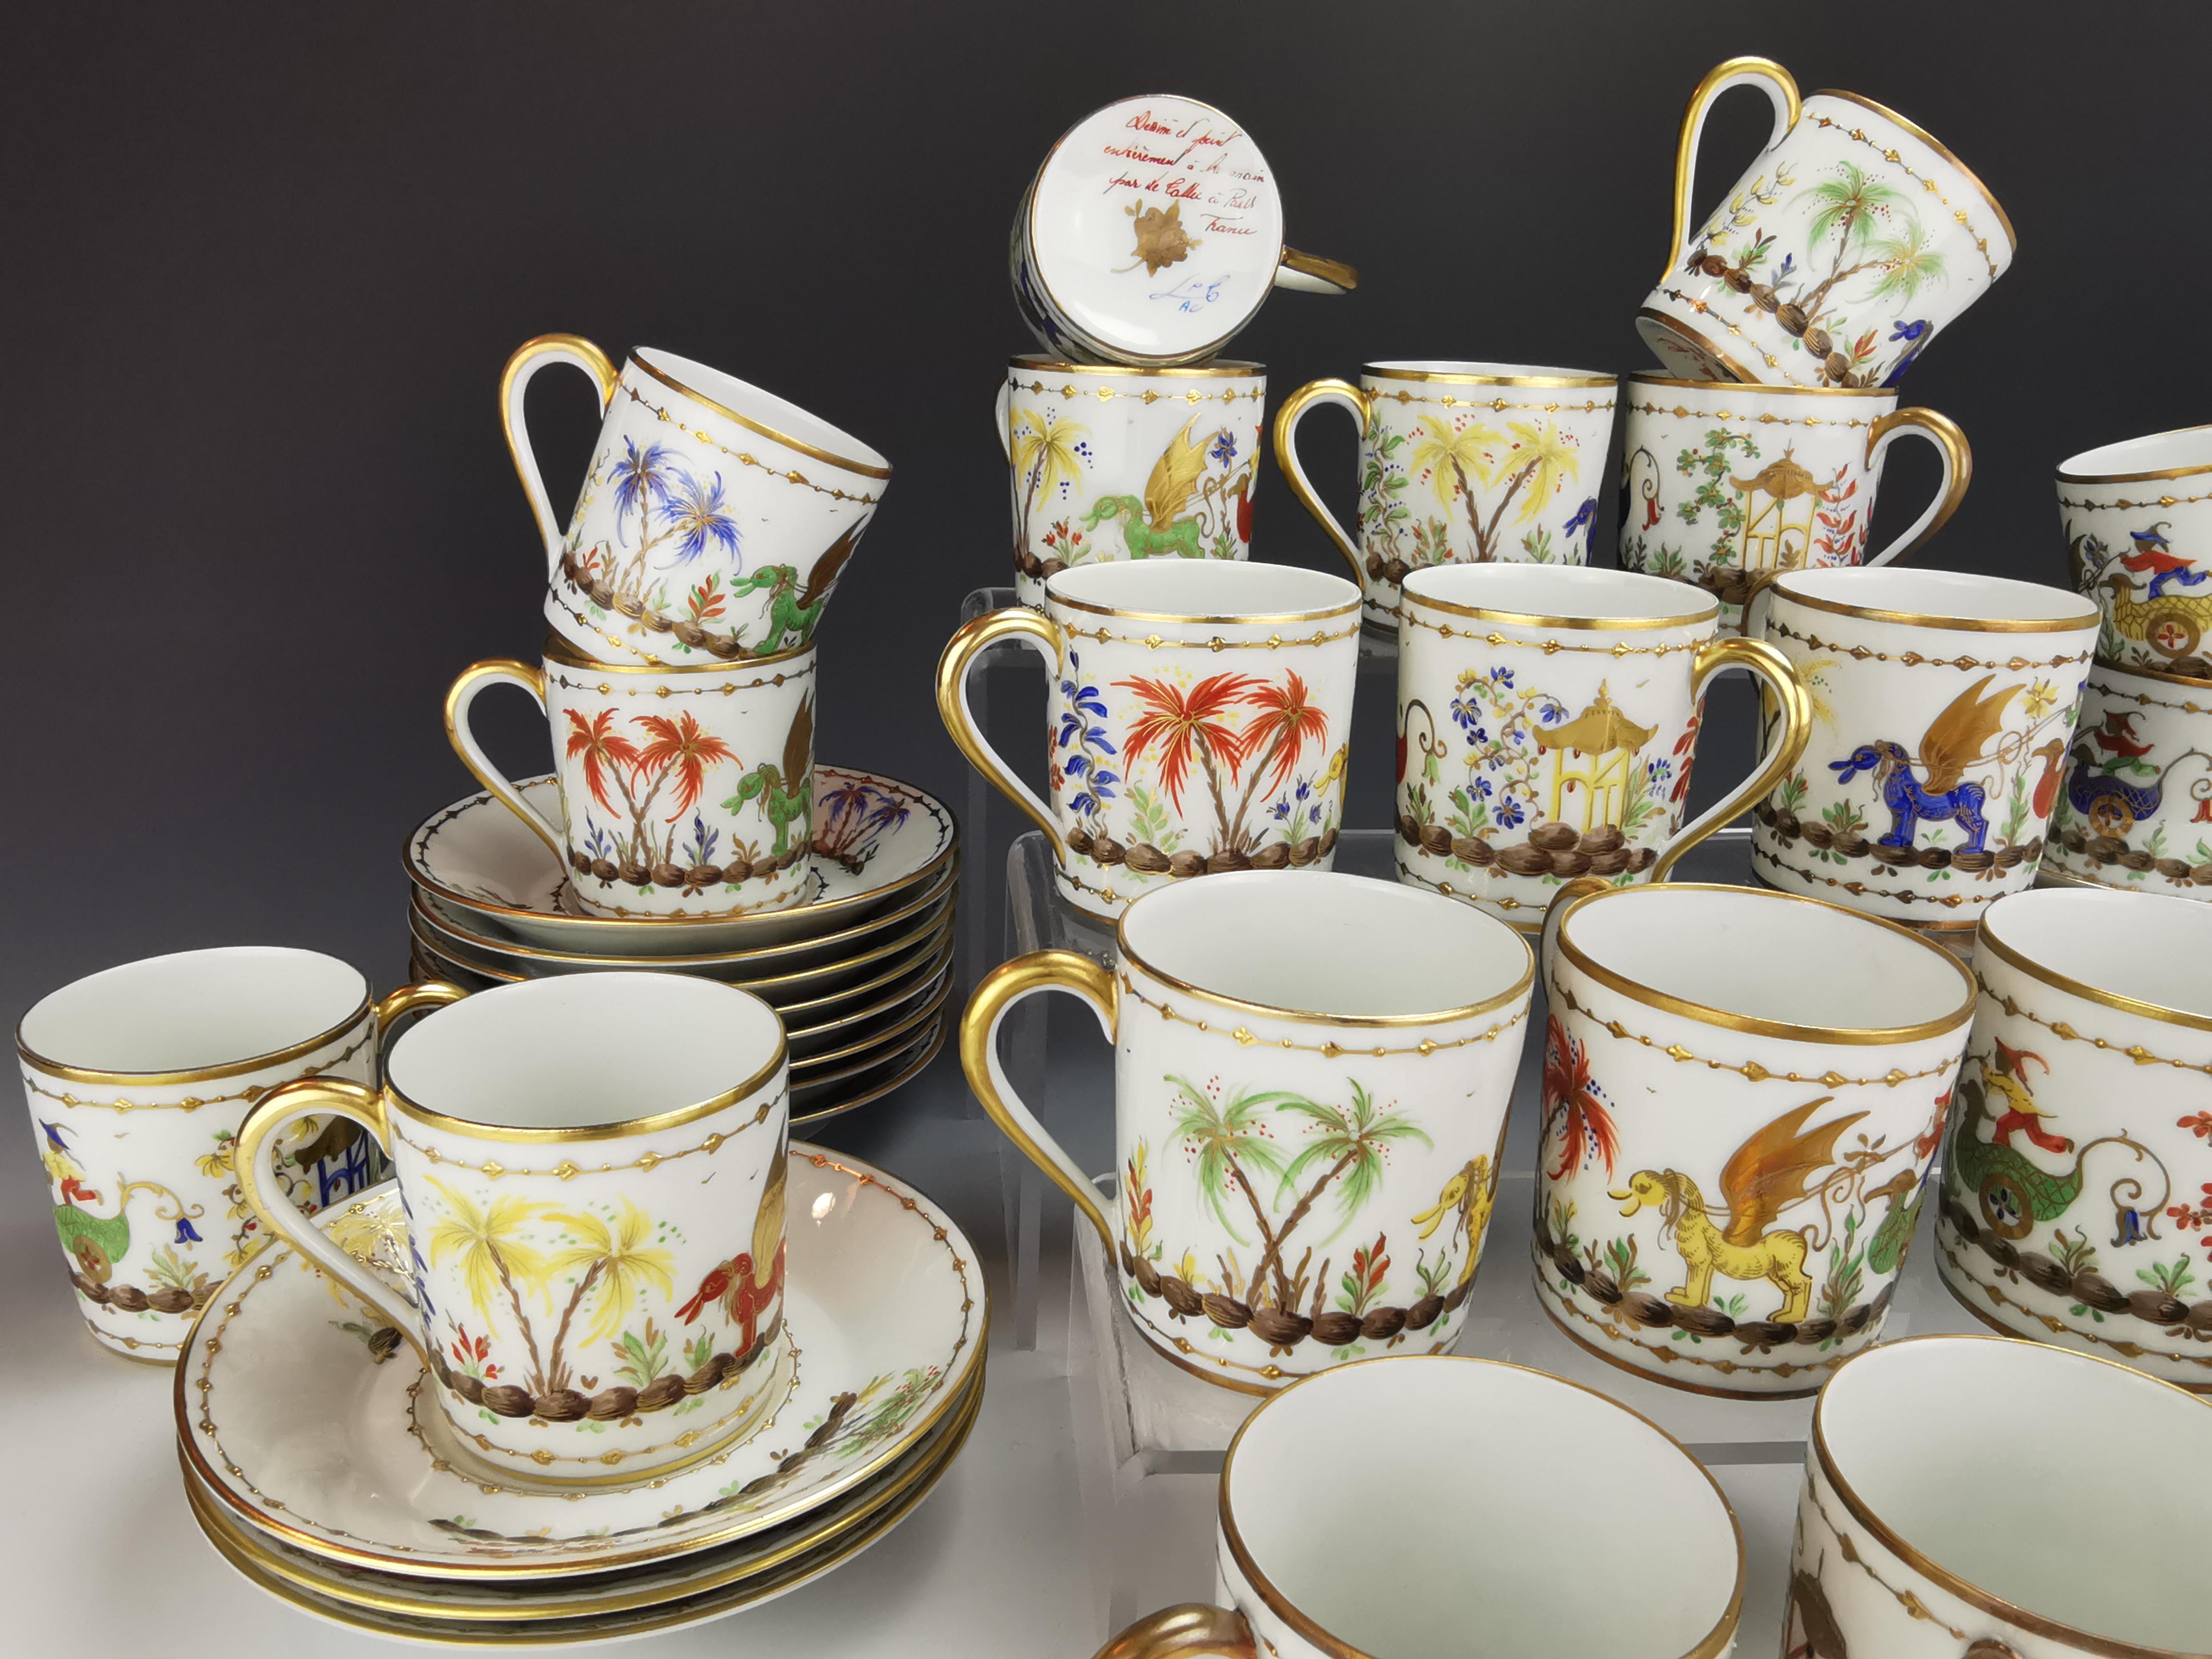 Rare 22 demitasse cups and saucers set in the 